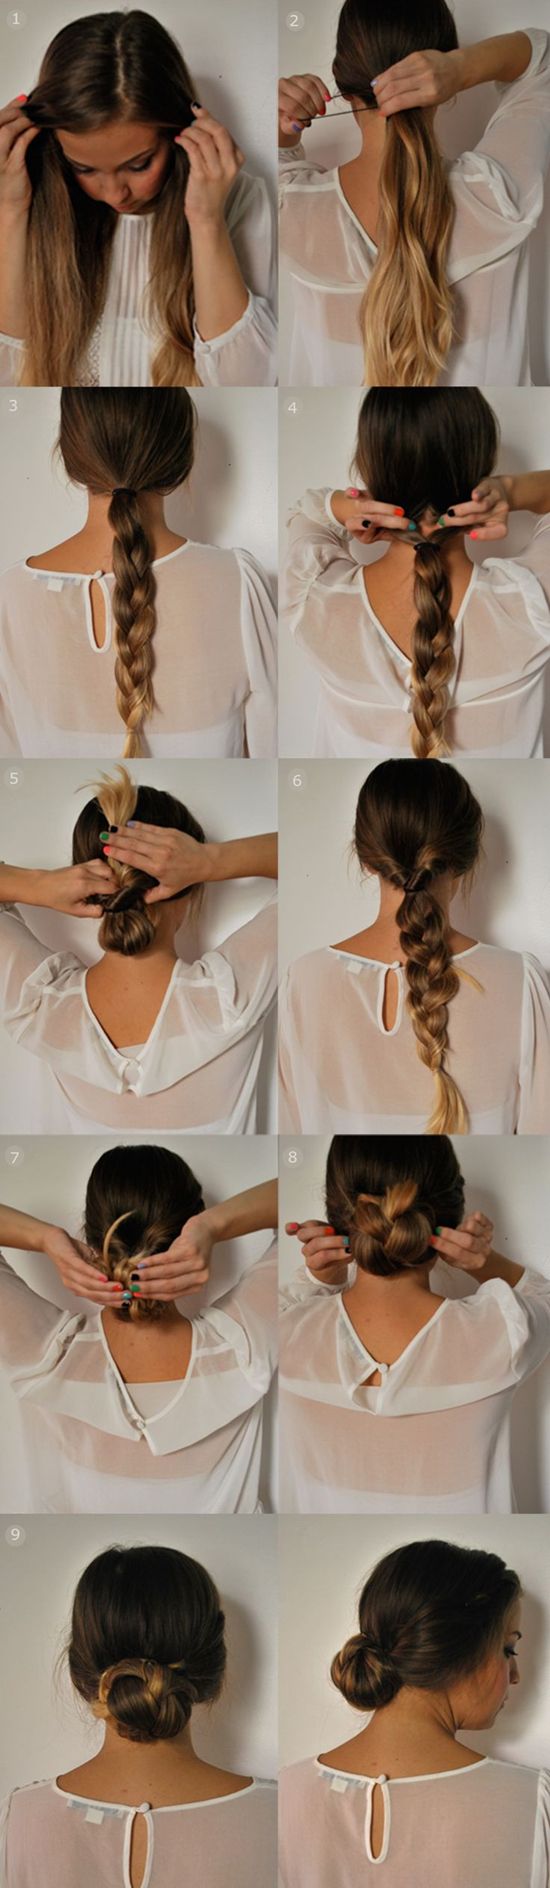 super-easy-hairstyles-for-short-hair-16_11 Super easy hairstyles for short hair